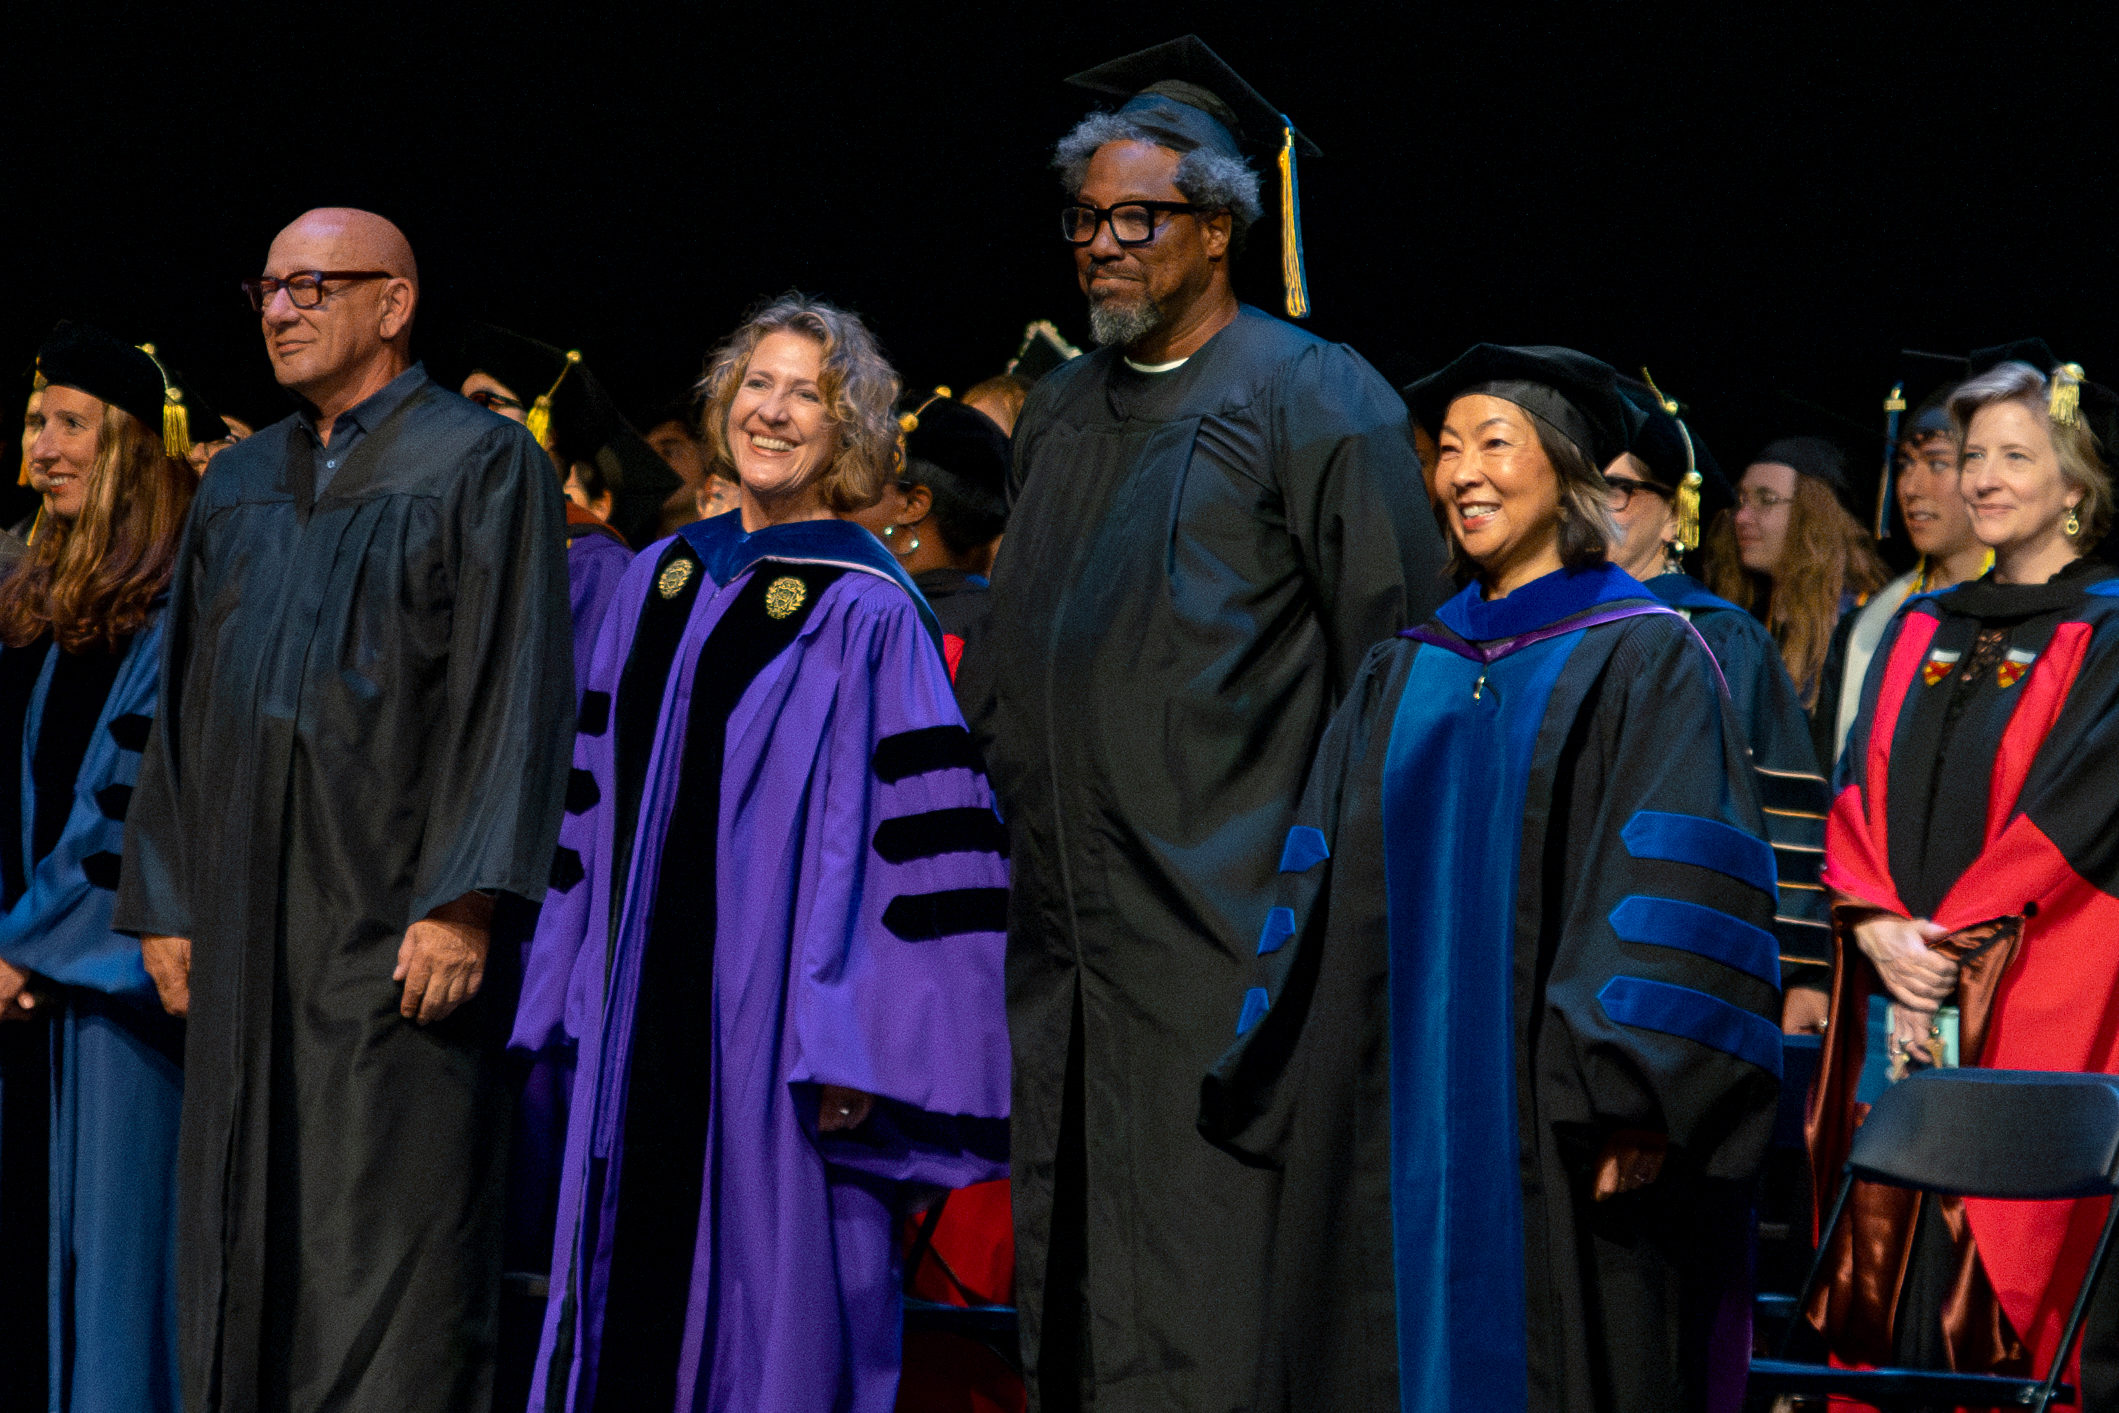 Faculty and guest pose during commencement ceremony in their regalia